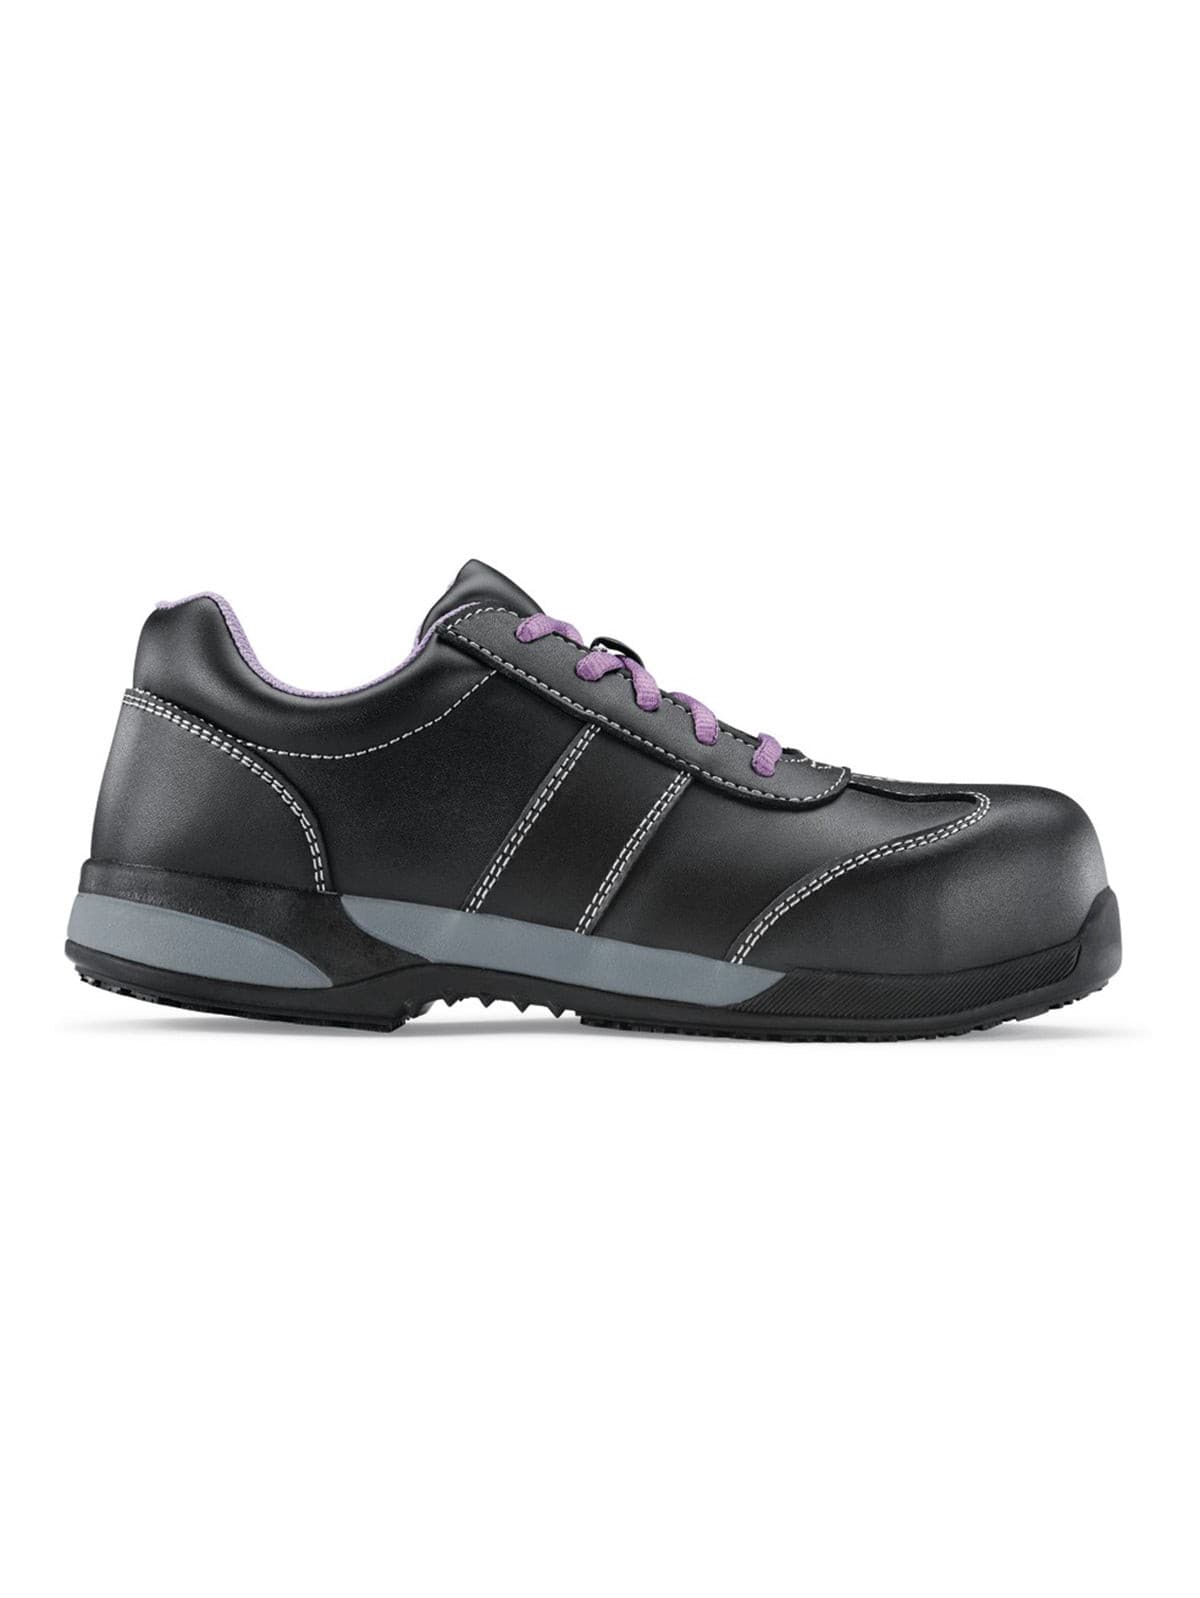 Women's Safety Shoe Bonnie (S3) by Safety Shoes -  ChefsCotton